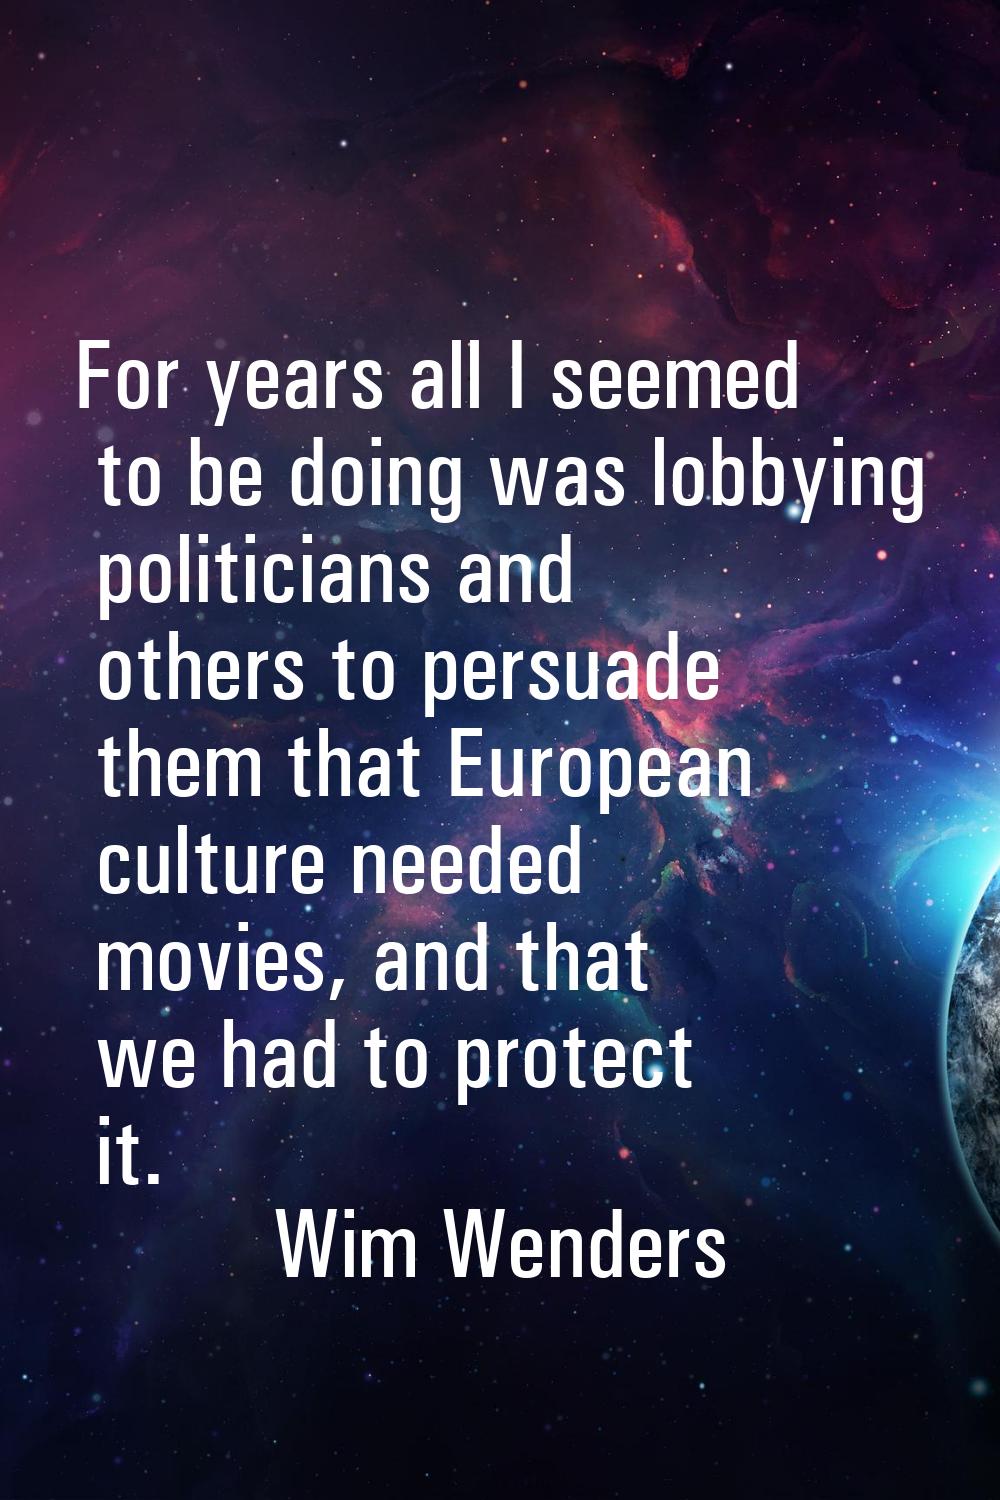 For years all I seemed to be doing was lobbying politicians and others to persuade them that Europe